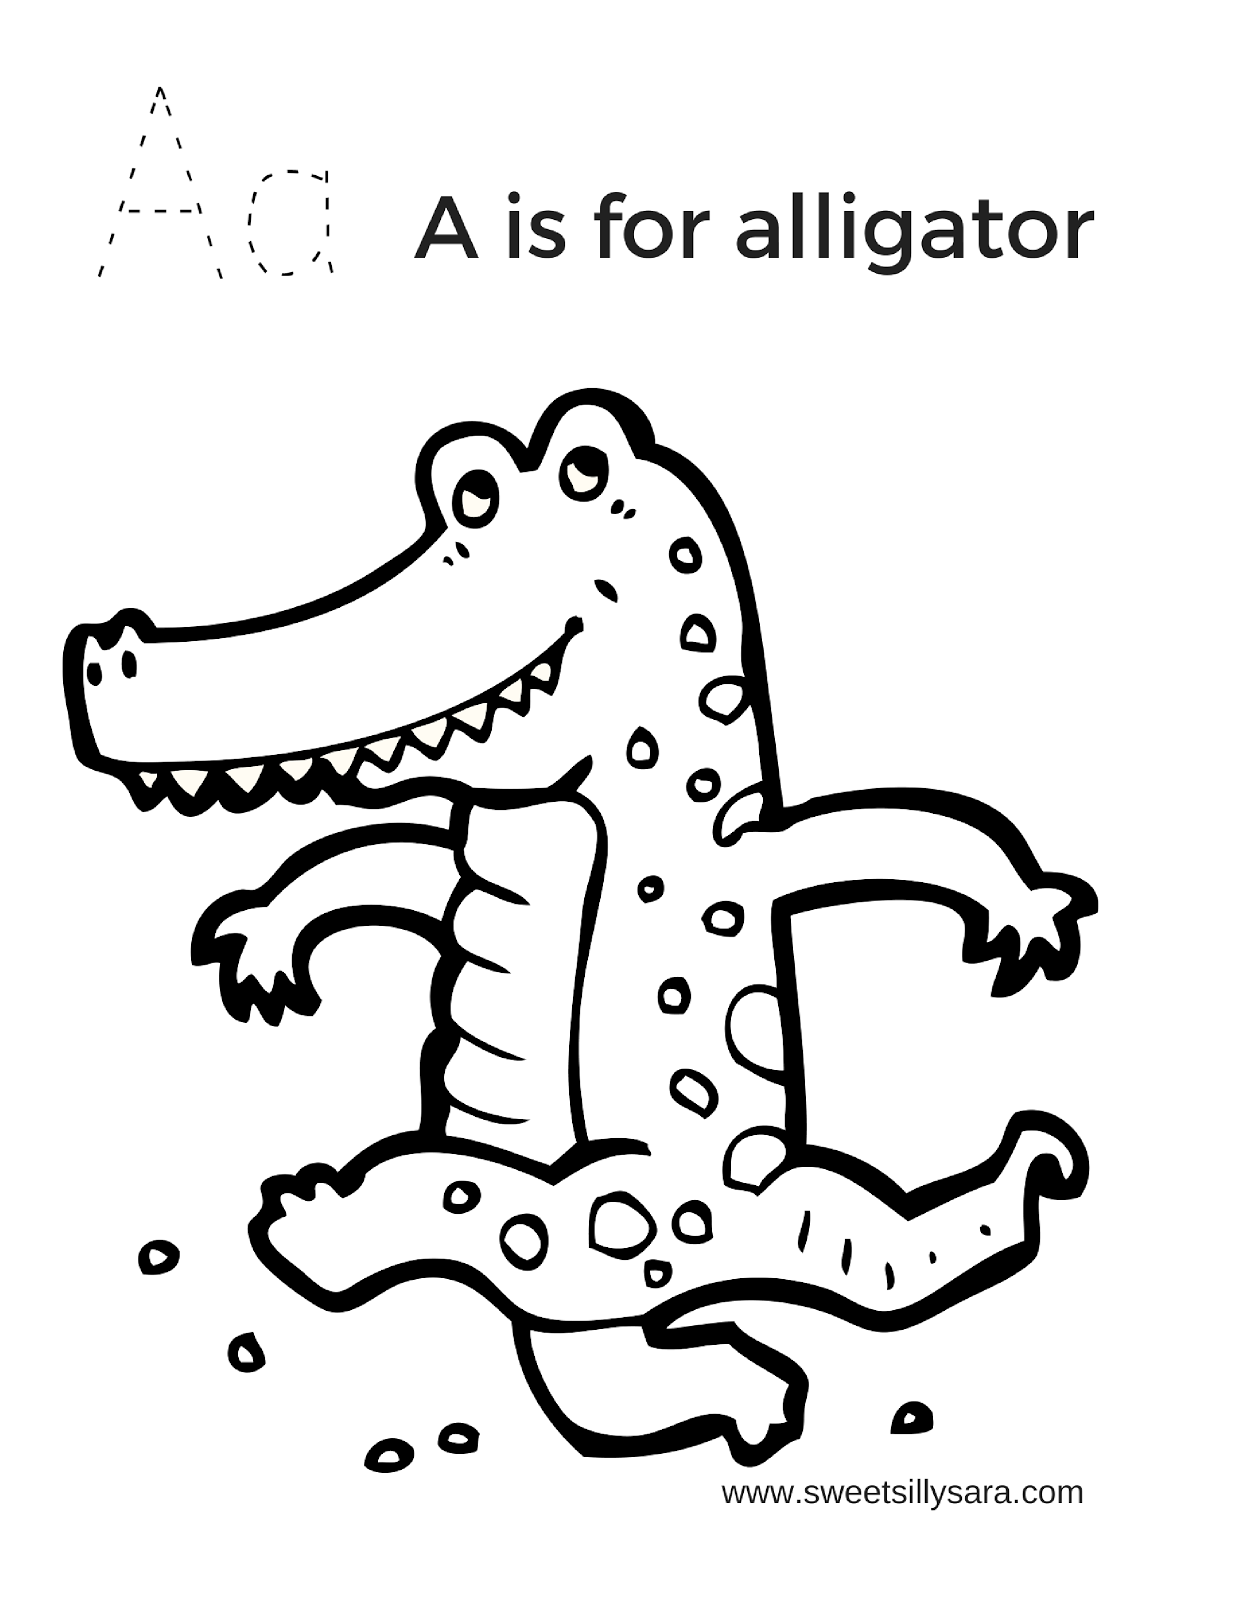 Crafting Reality with Sara: A is for Alligator Coloring Page